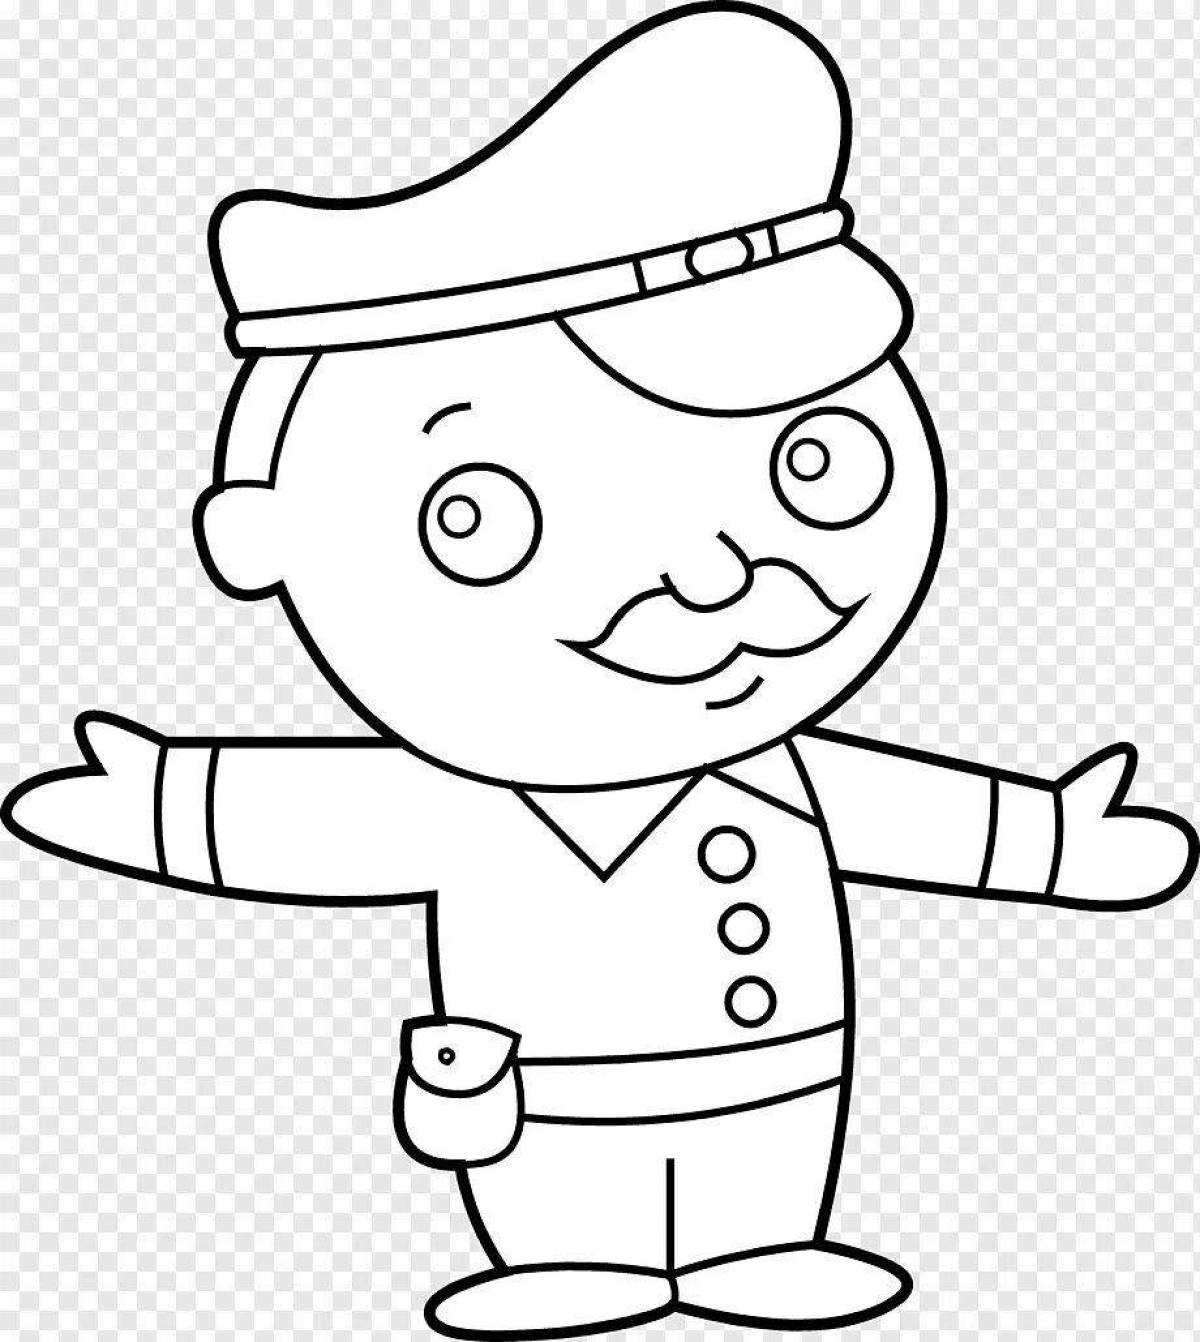 Junior traffic controller playful coloring page